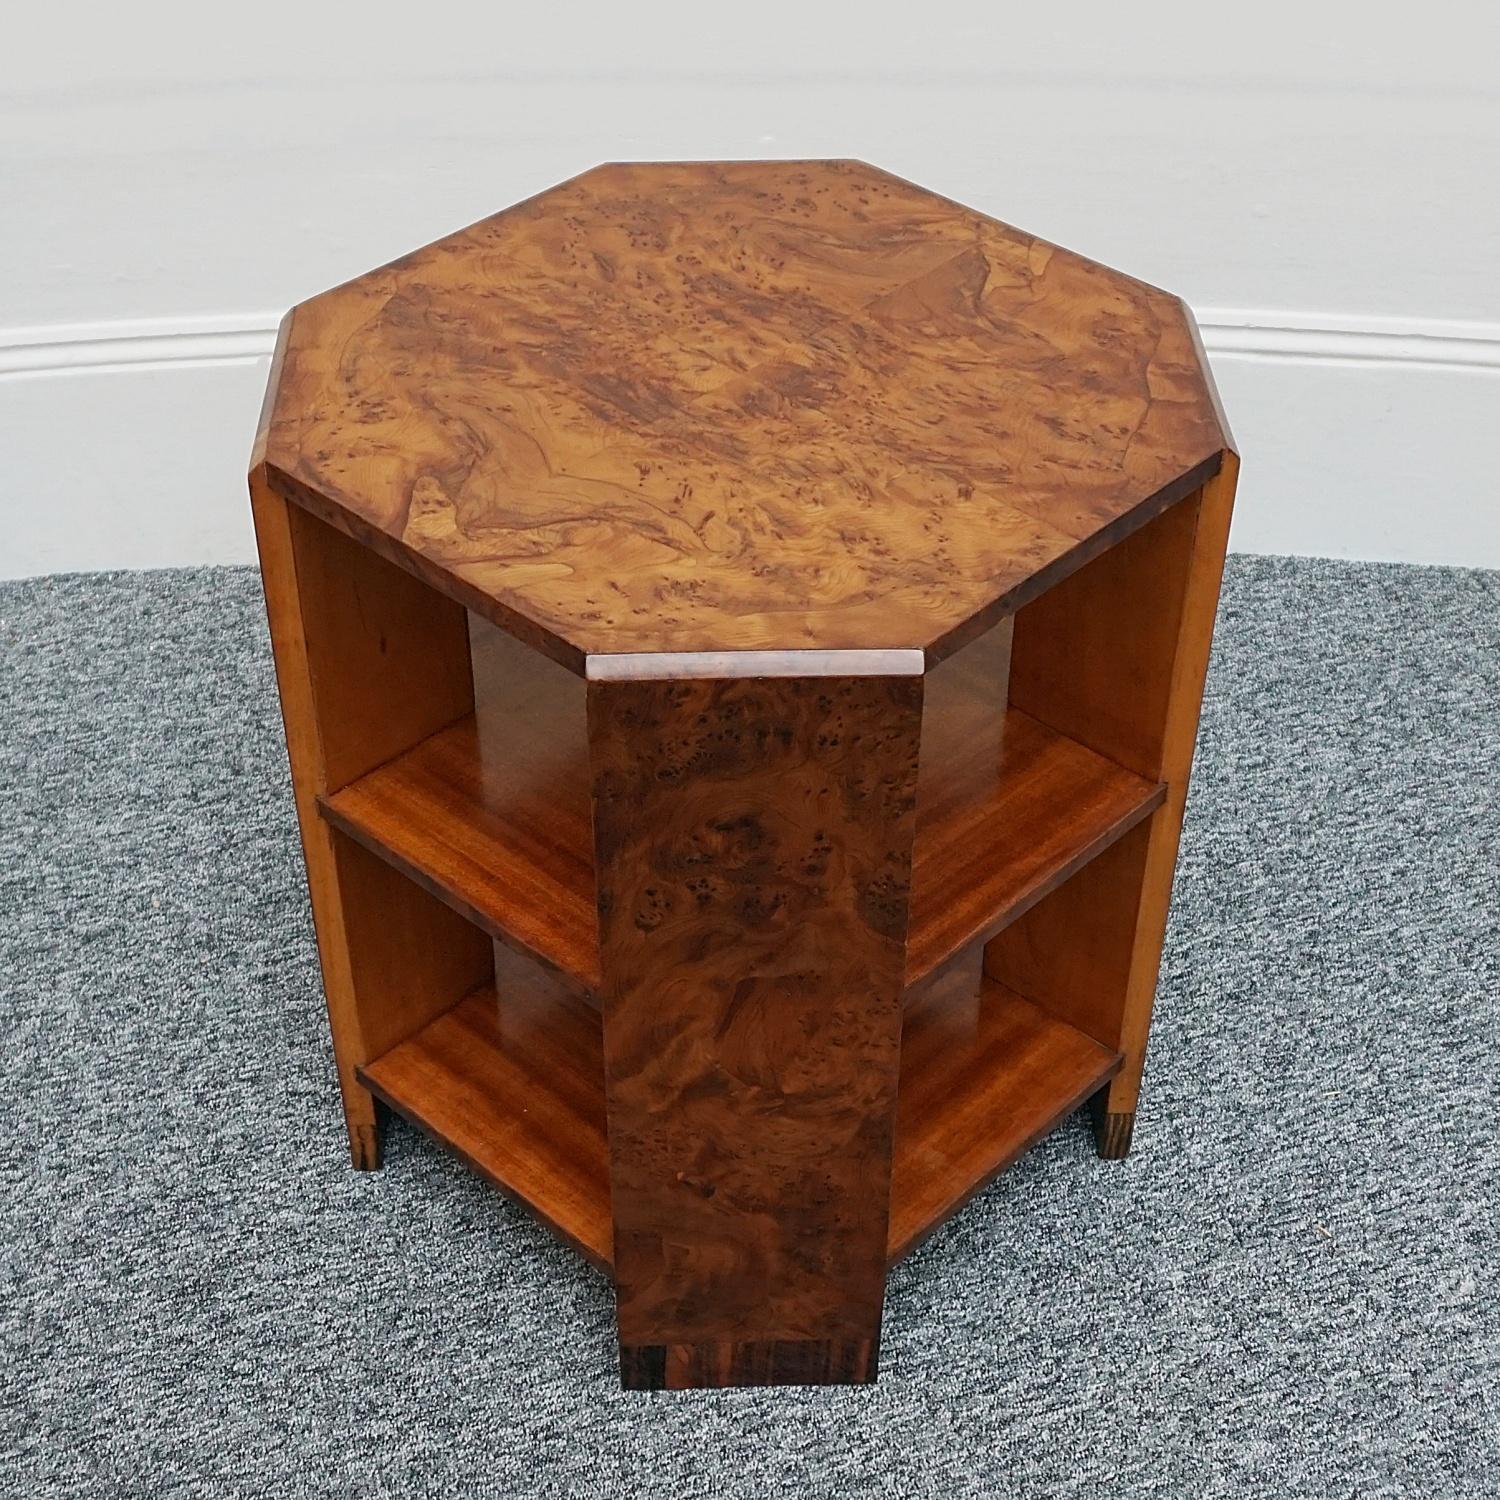 European Art Deco Yew Wood Side Table by Waring & Gillow Ltd, circa 1935